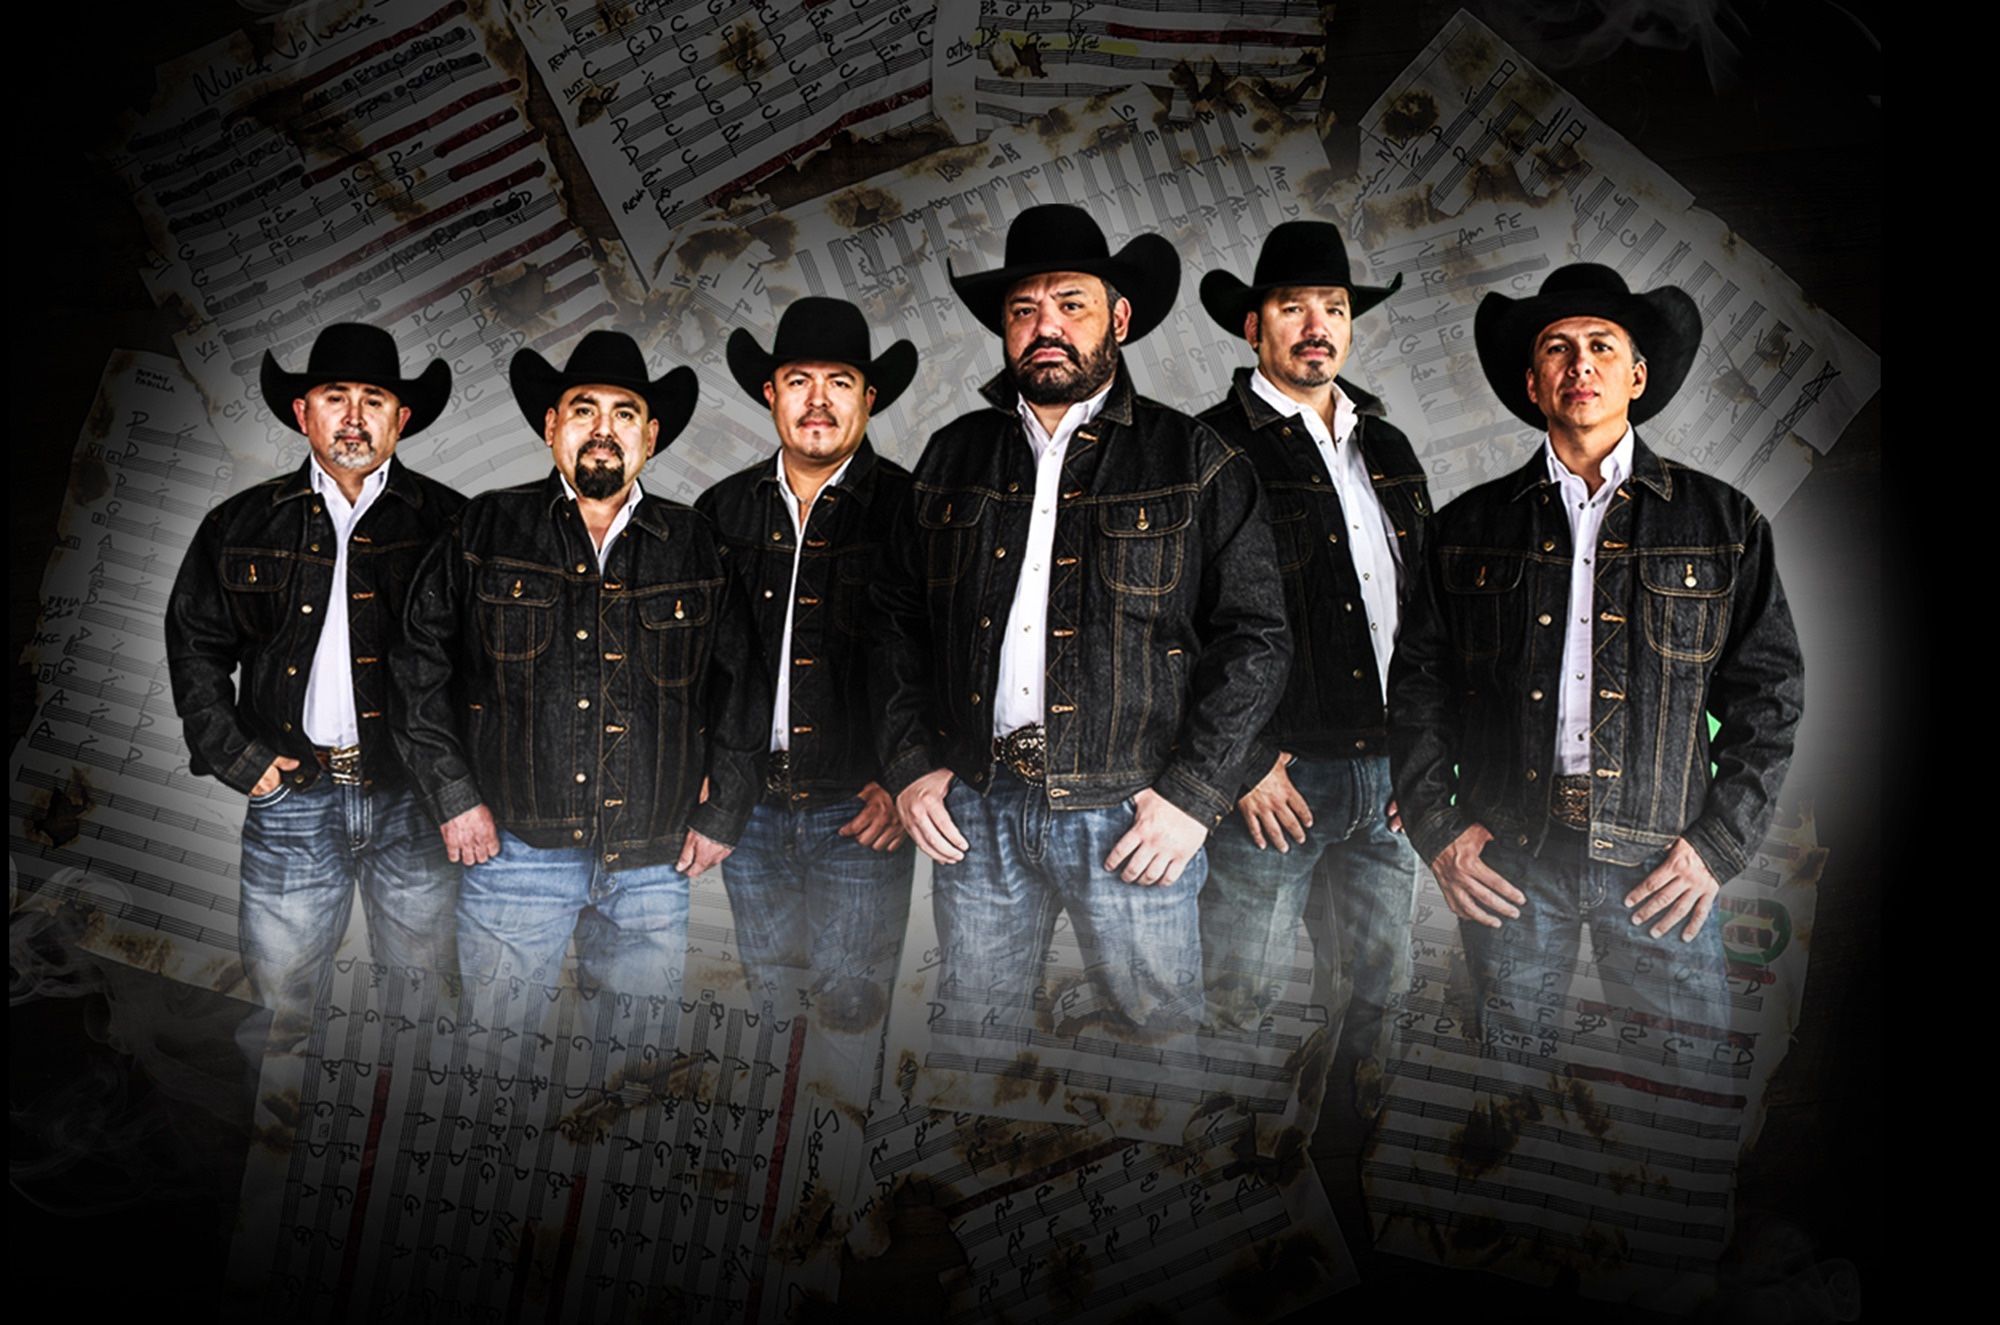 INTOCABLE 4/6/24 SECTION 104 ROW H Seat 3-4 